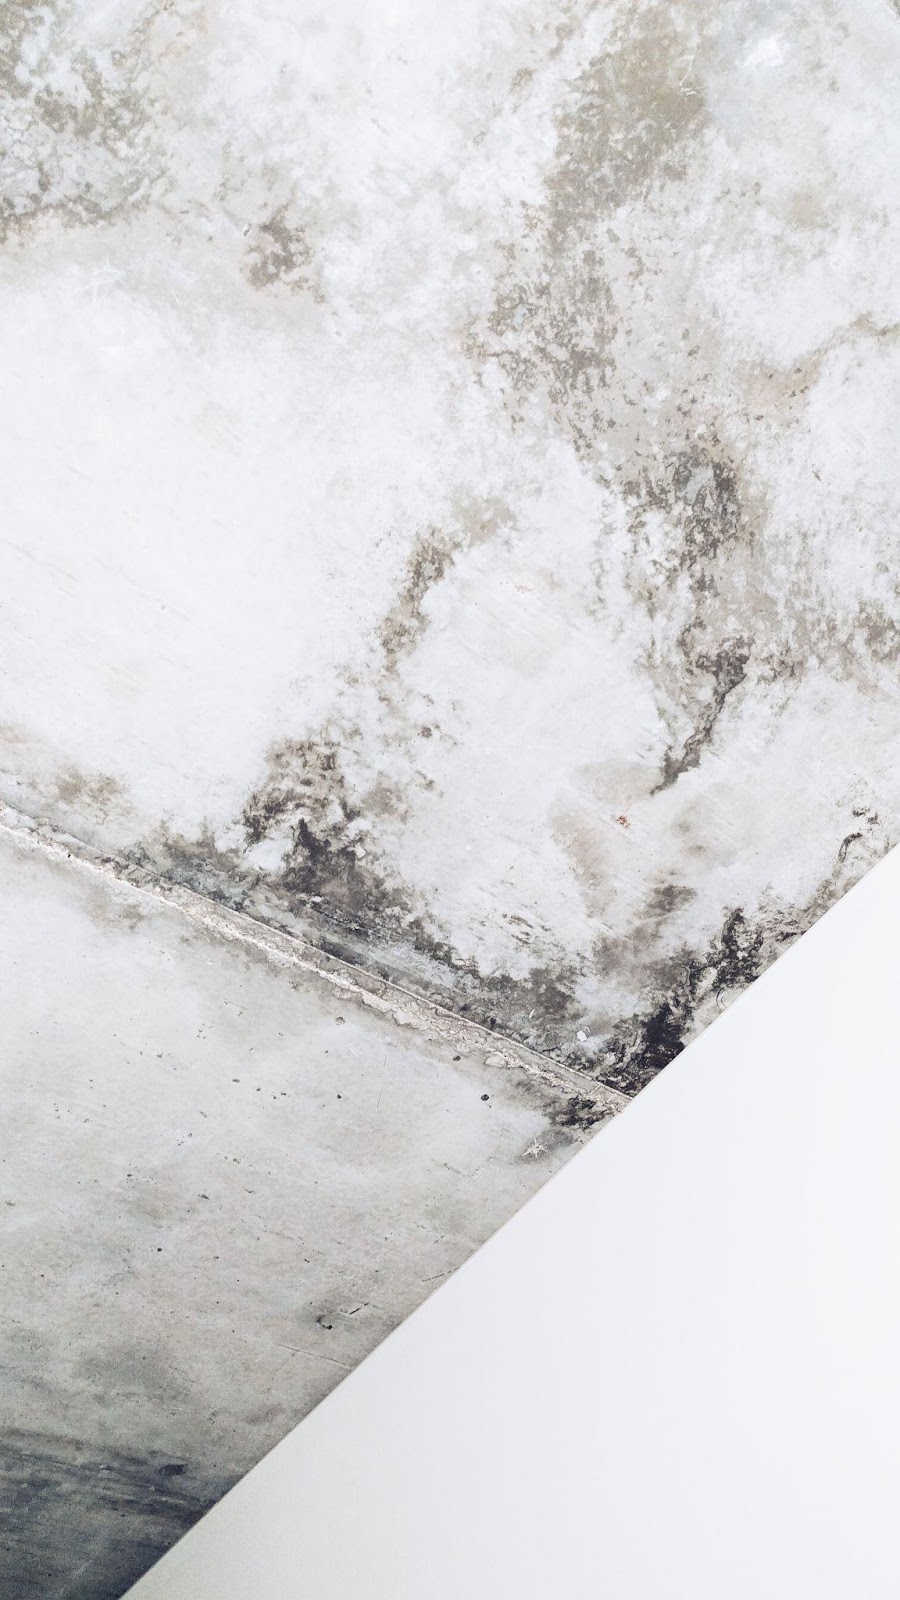 Mould growth on ceiling tiles